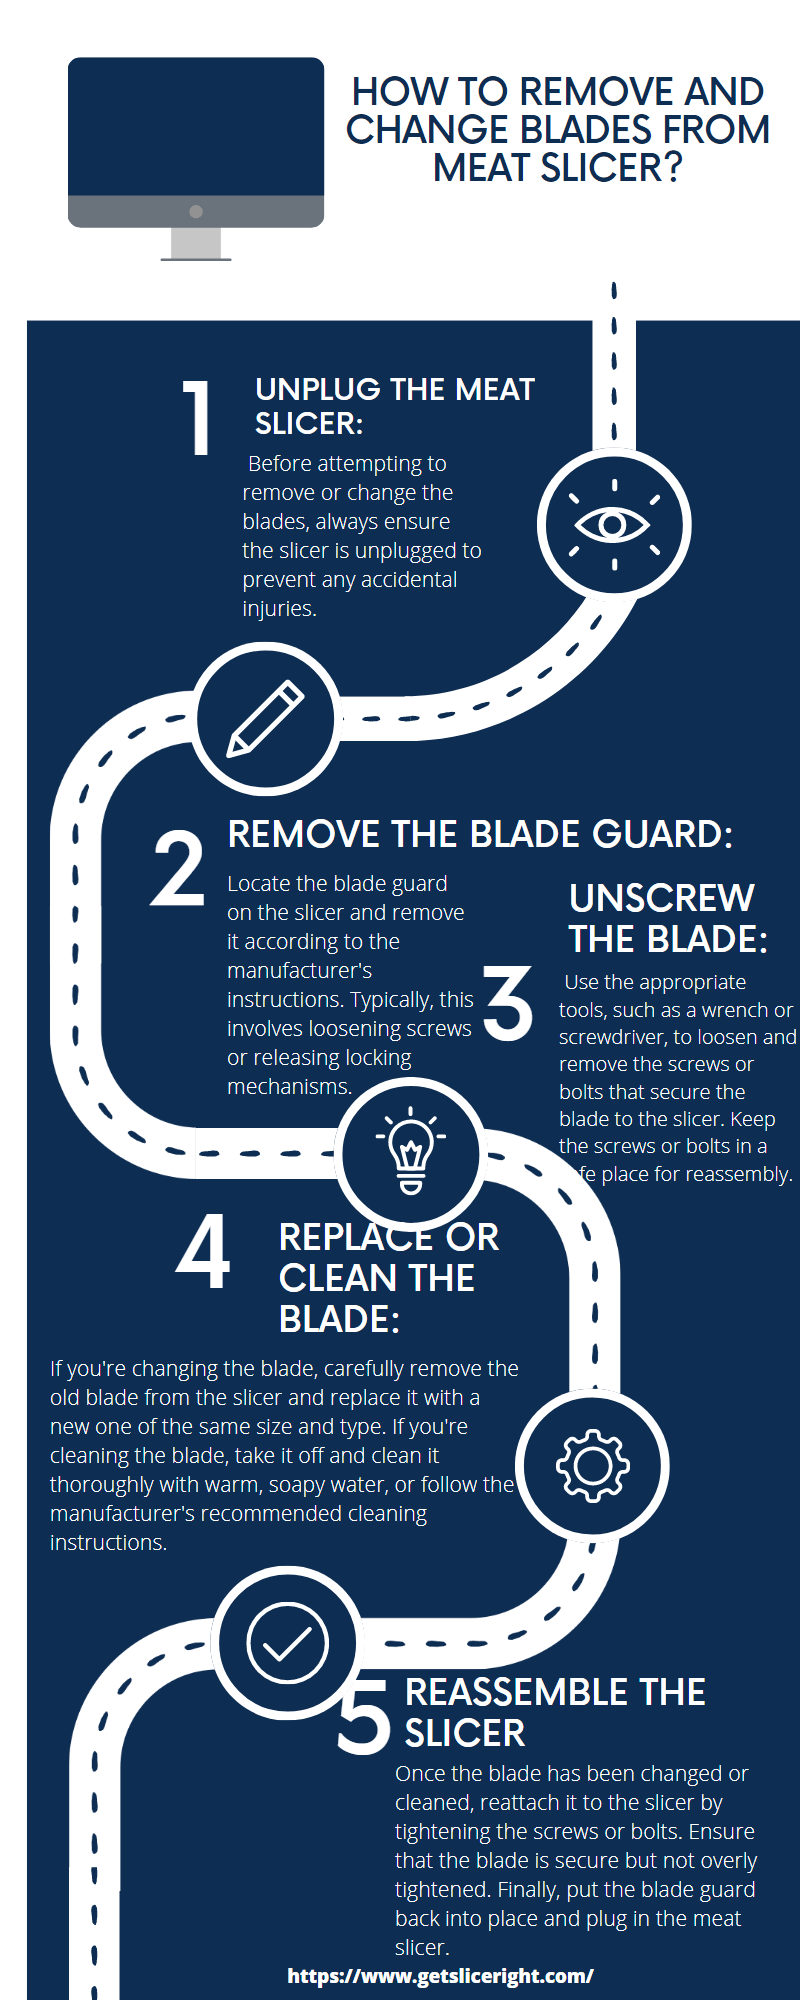 How to remove and change blades from meat slicer - Getsliceright Infographic